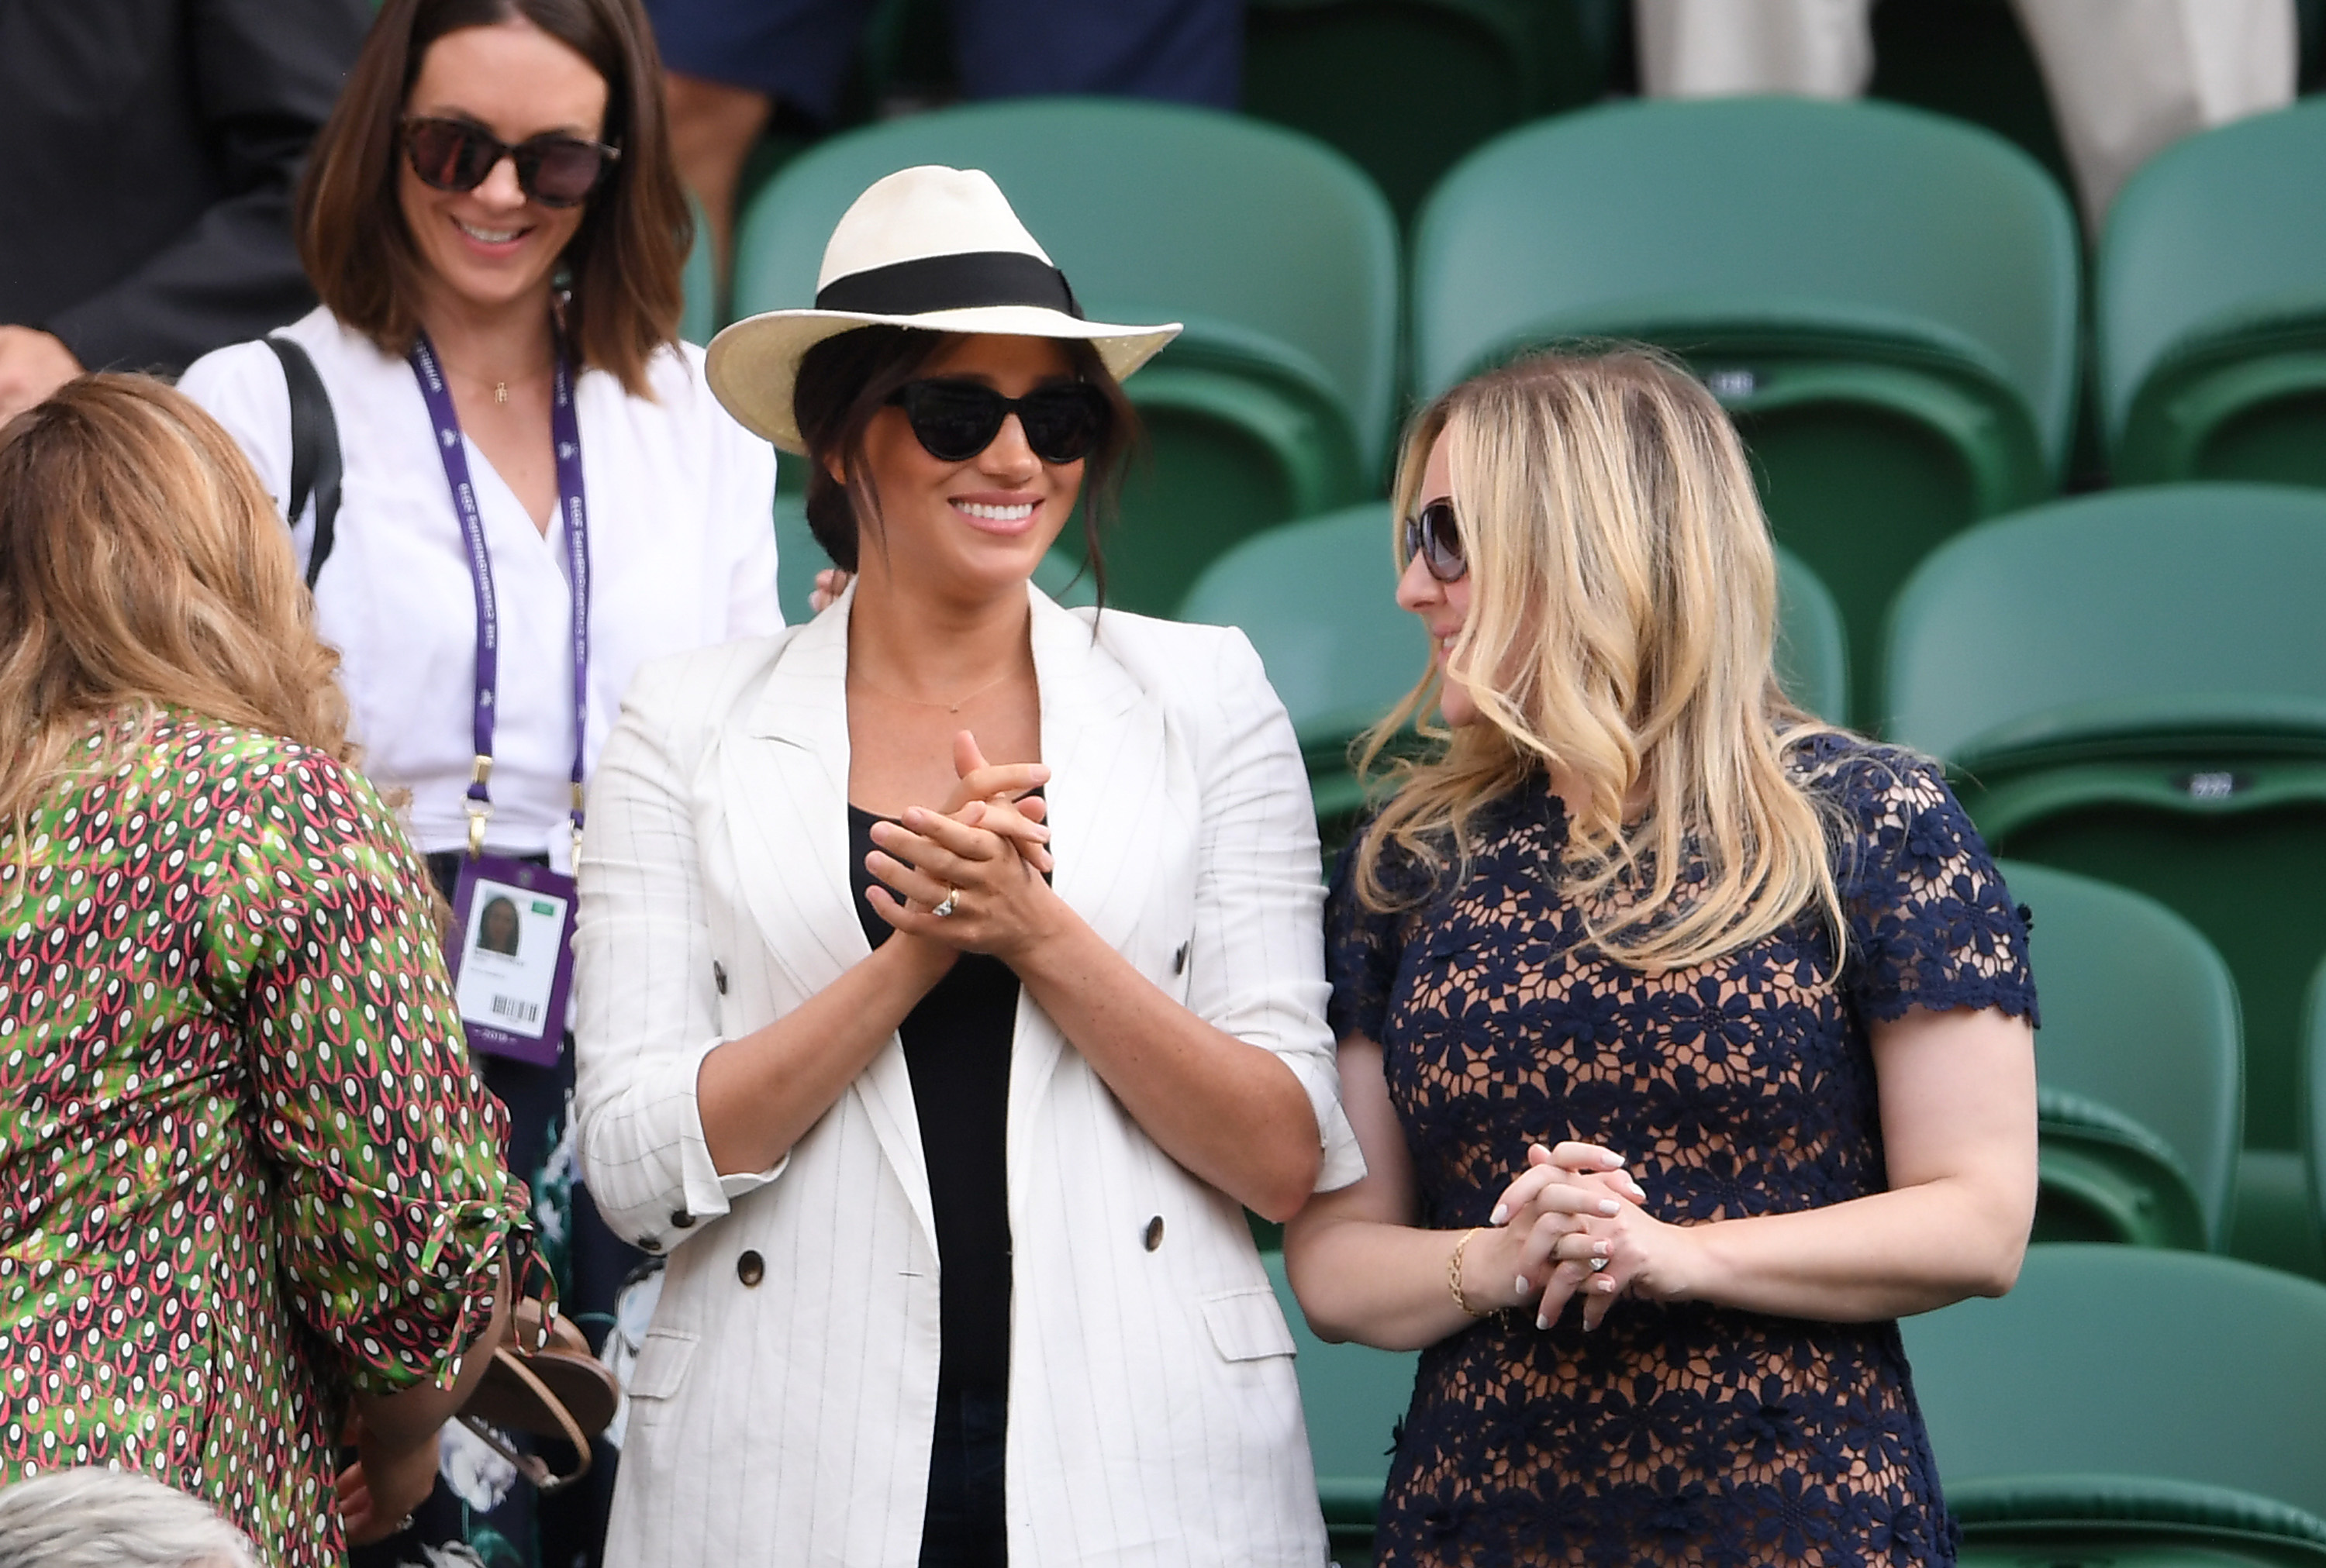 Meghan Markle, Duchess of Sussex watches on during the ladies' Singles Second round match between Serena Williams of The United States and Kaja Juvan of Slovenia during Day four of The Championships - Wimbledon 2019 at All England Lawn Tennis and Croquet Club on July 04, 2019 in London, England. (Photo by Laurence Griffiths/Getty Images) (Laurence Griffiths&amp;Getty Images)